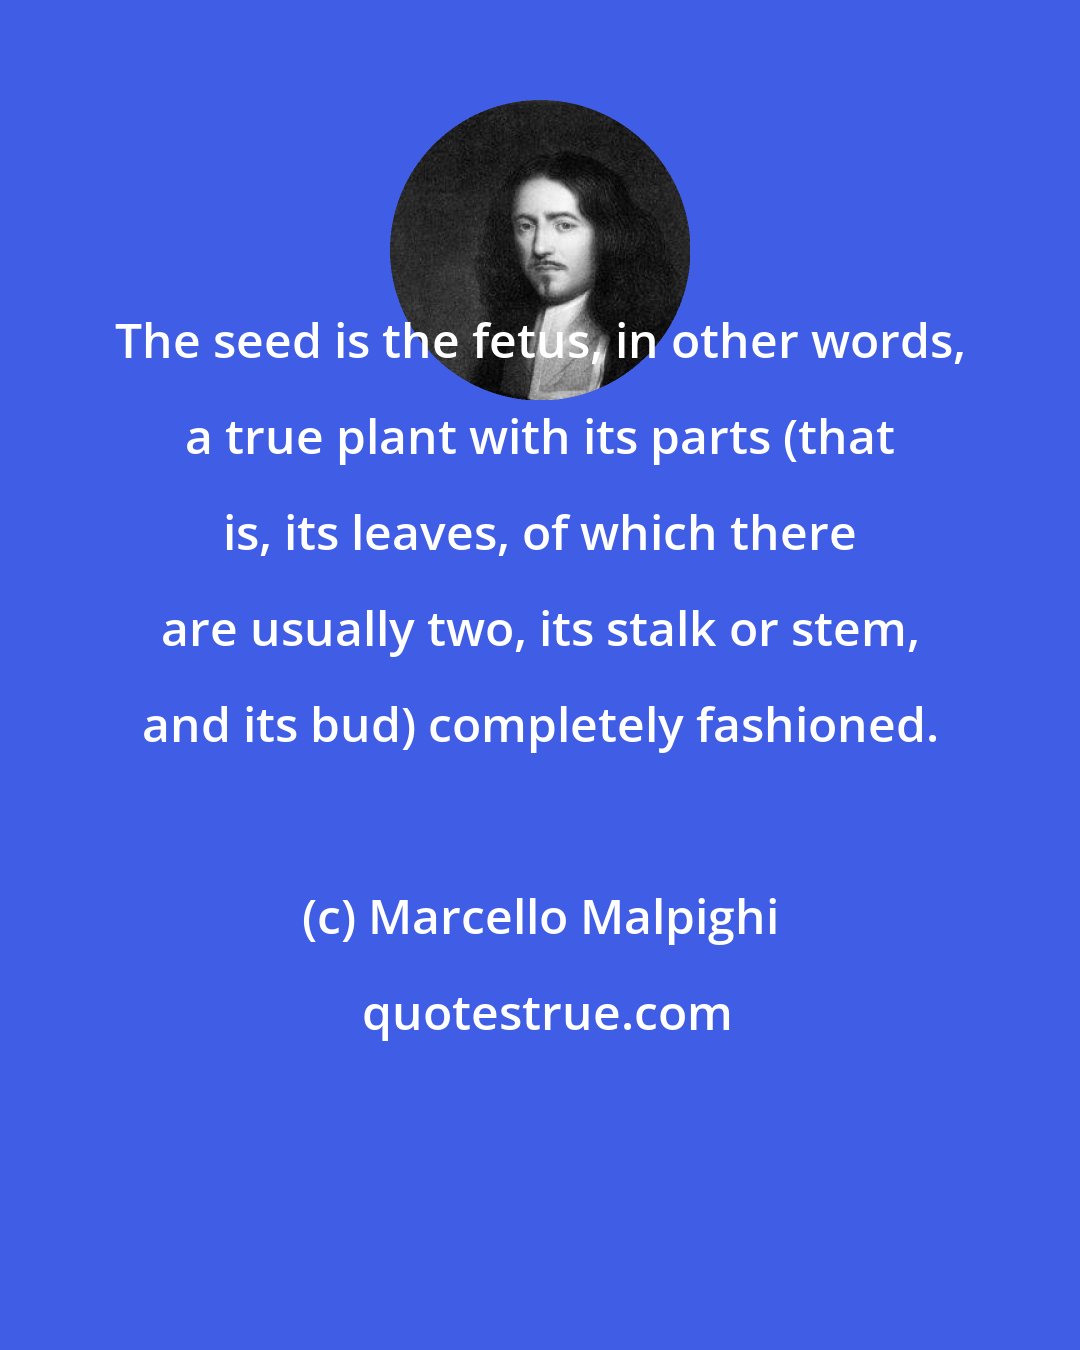 Marcello Malpighi: The seed is the fetus, in other words, a true plant with its parts (that is, its leaves, of which there are usually two, its stalk or stem, and its bud) completely fashioned.